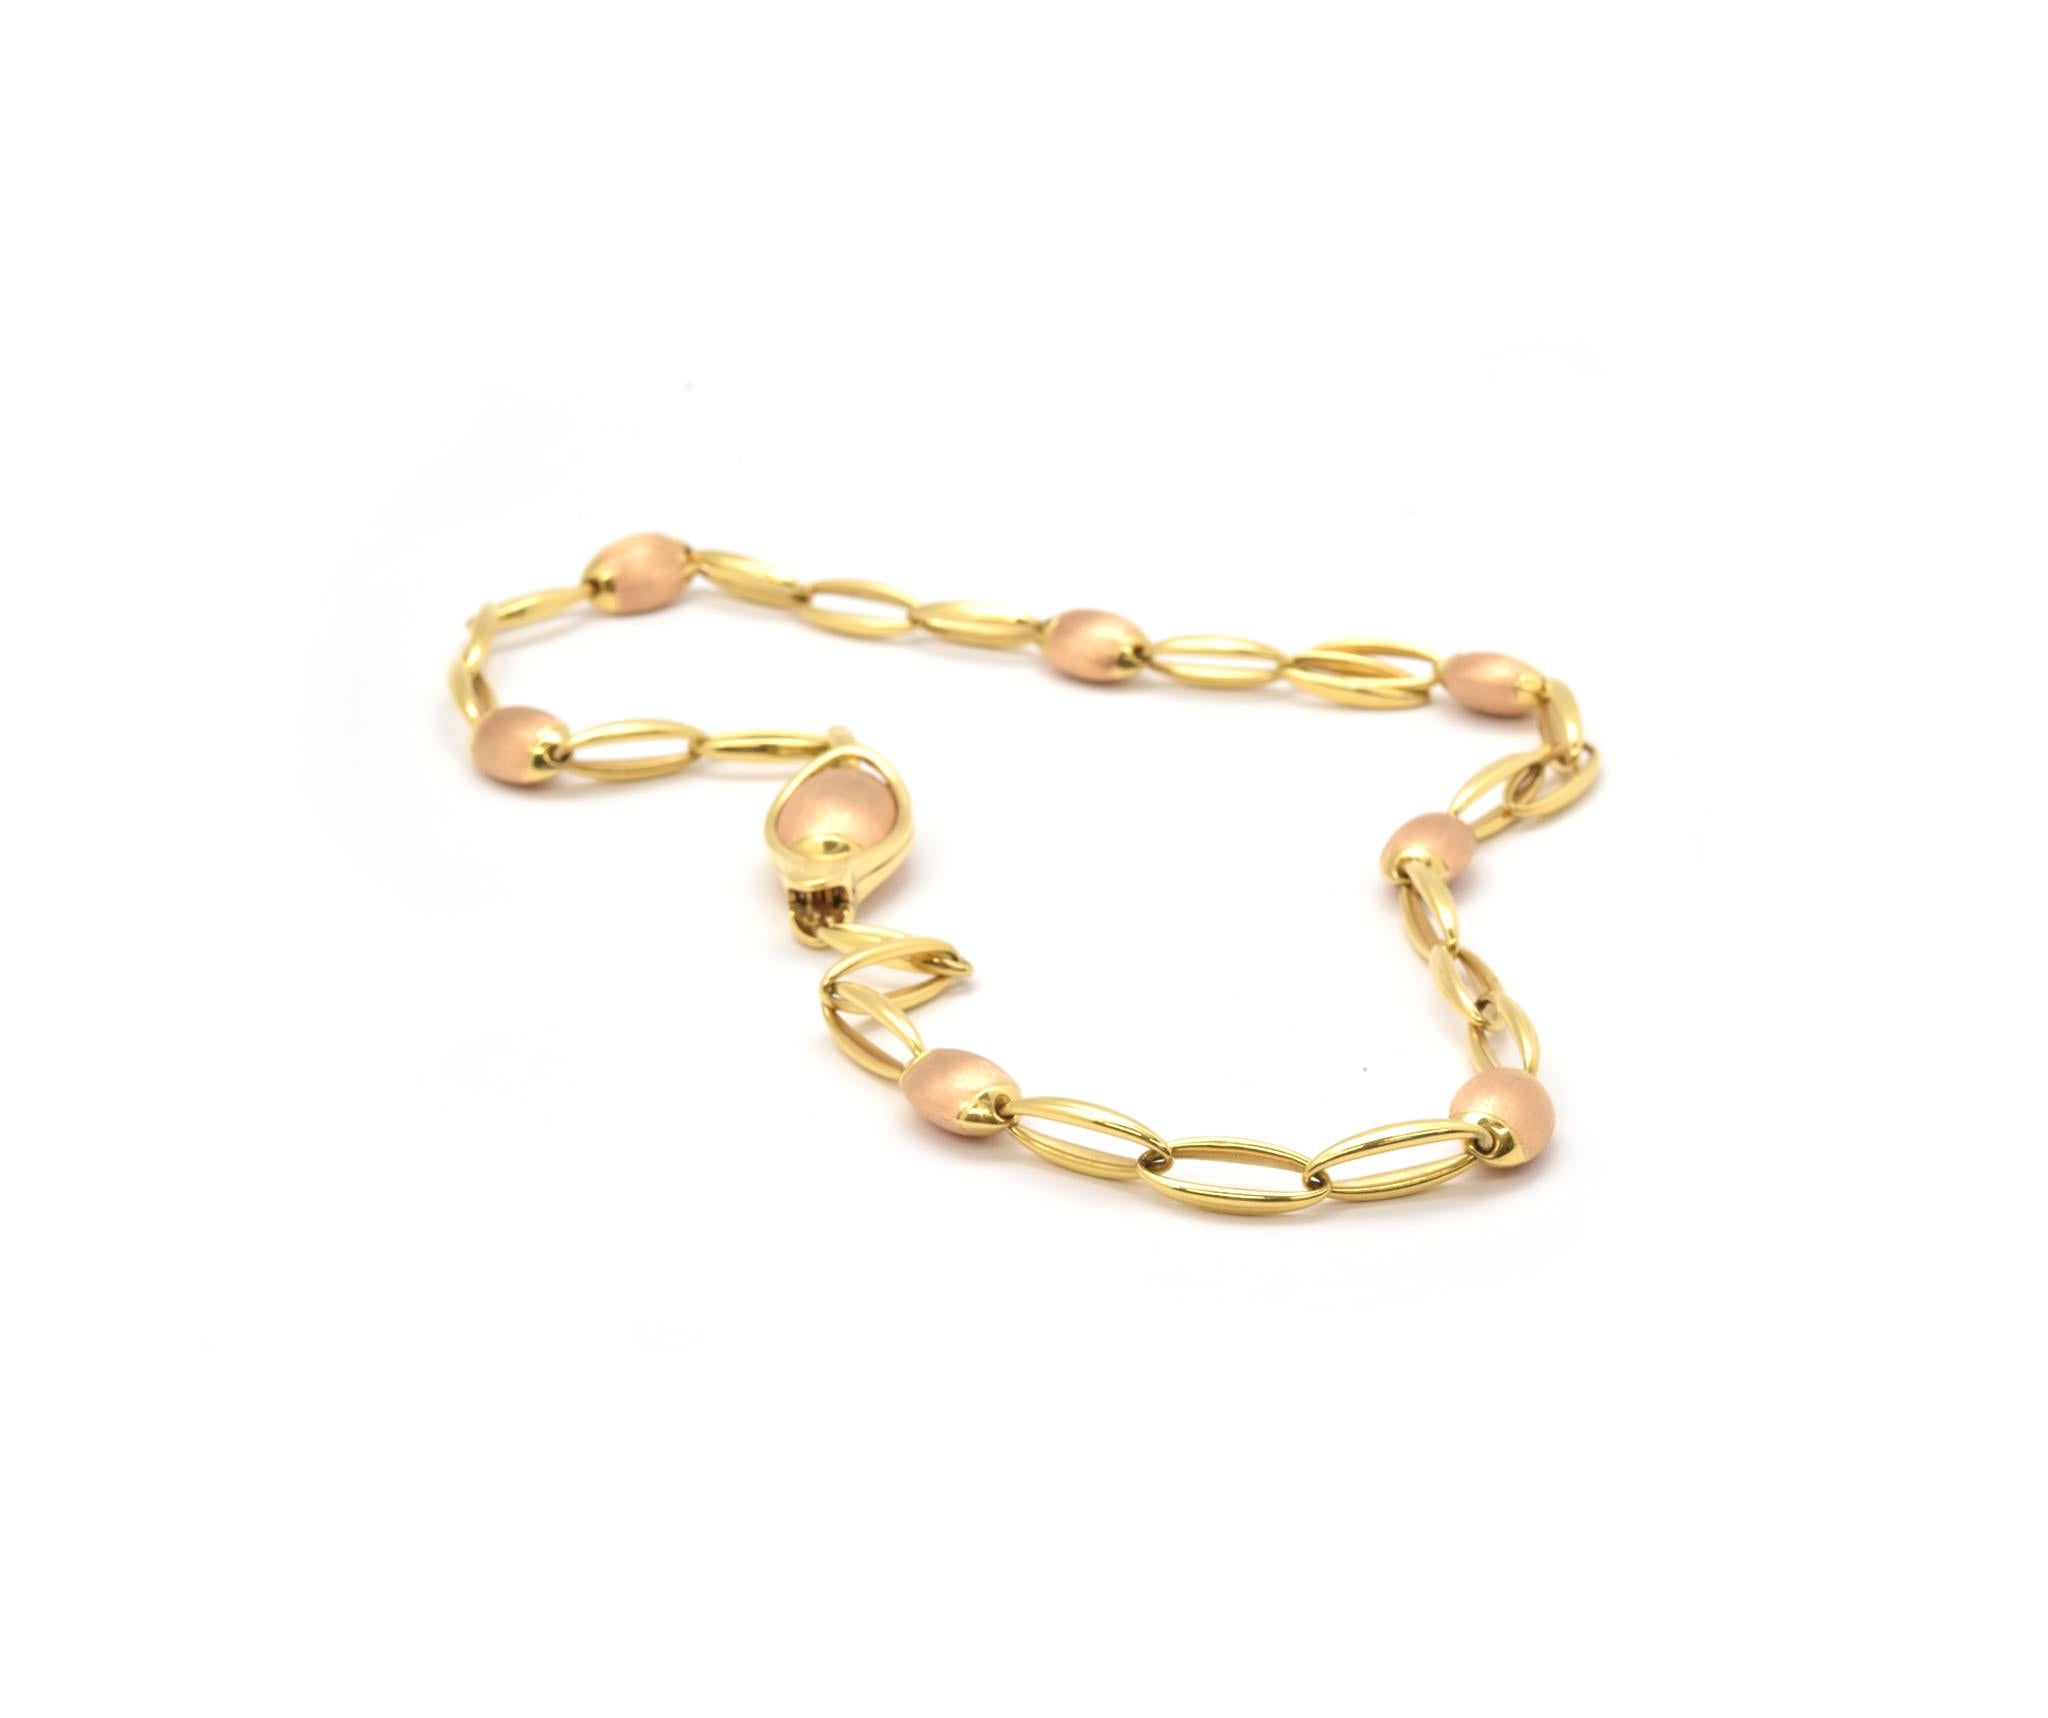 Contemporary Chimento 18 Karat Yellow and Rose Gold Oval Link Chain Necklace